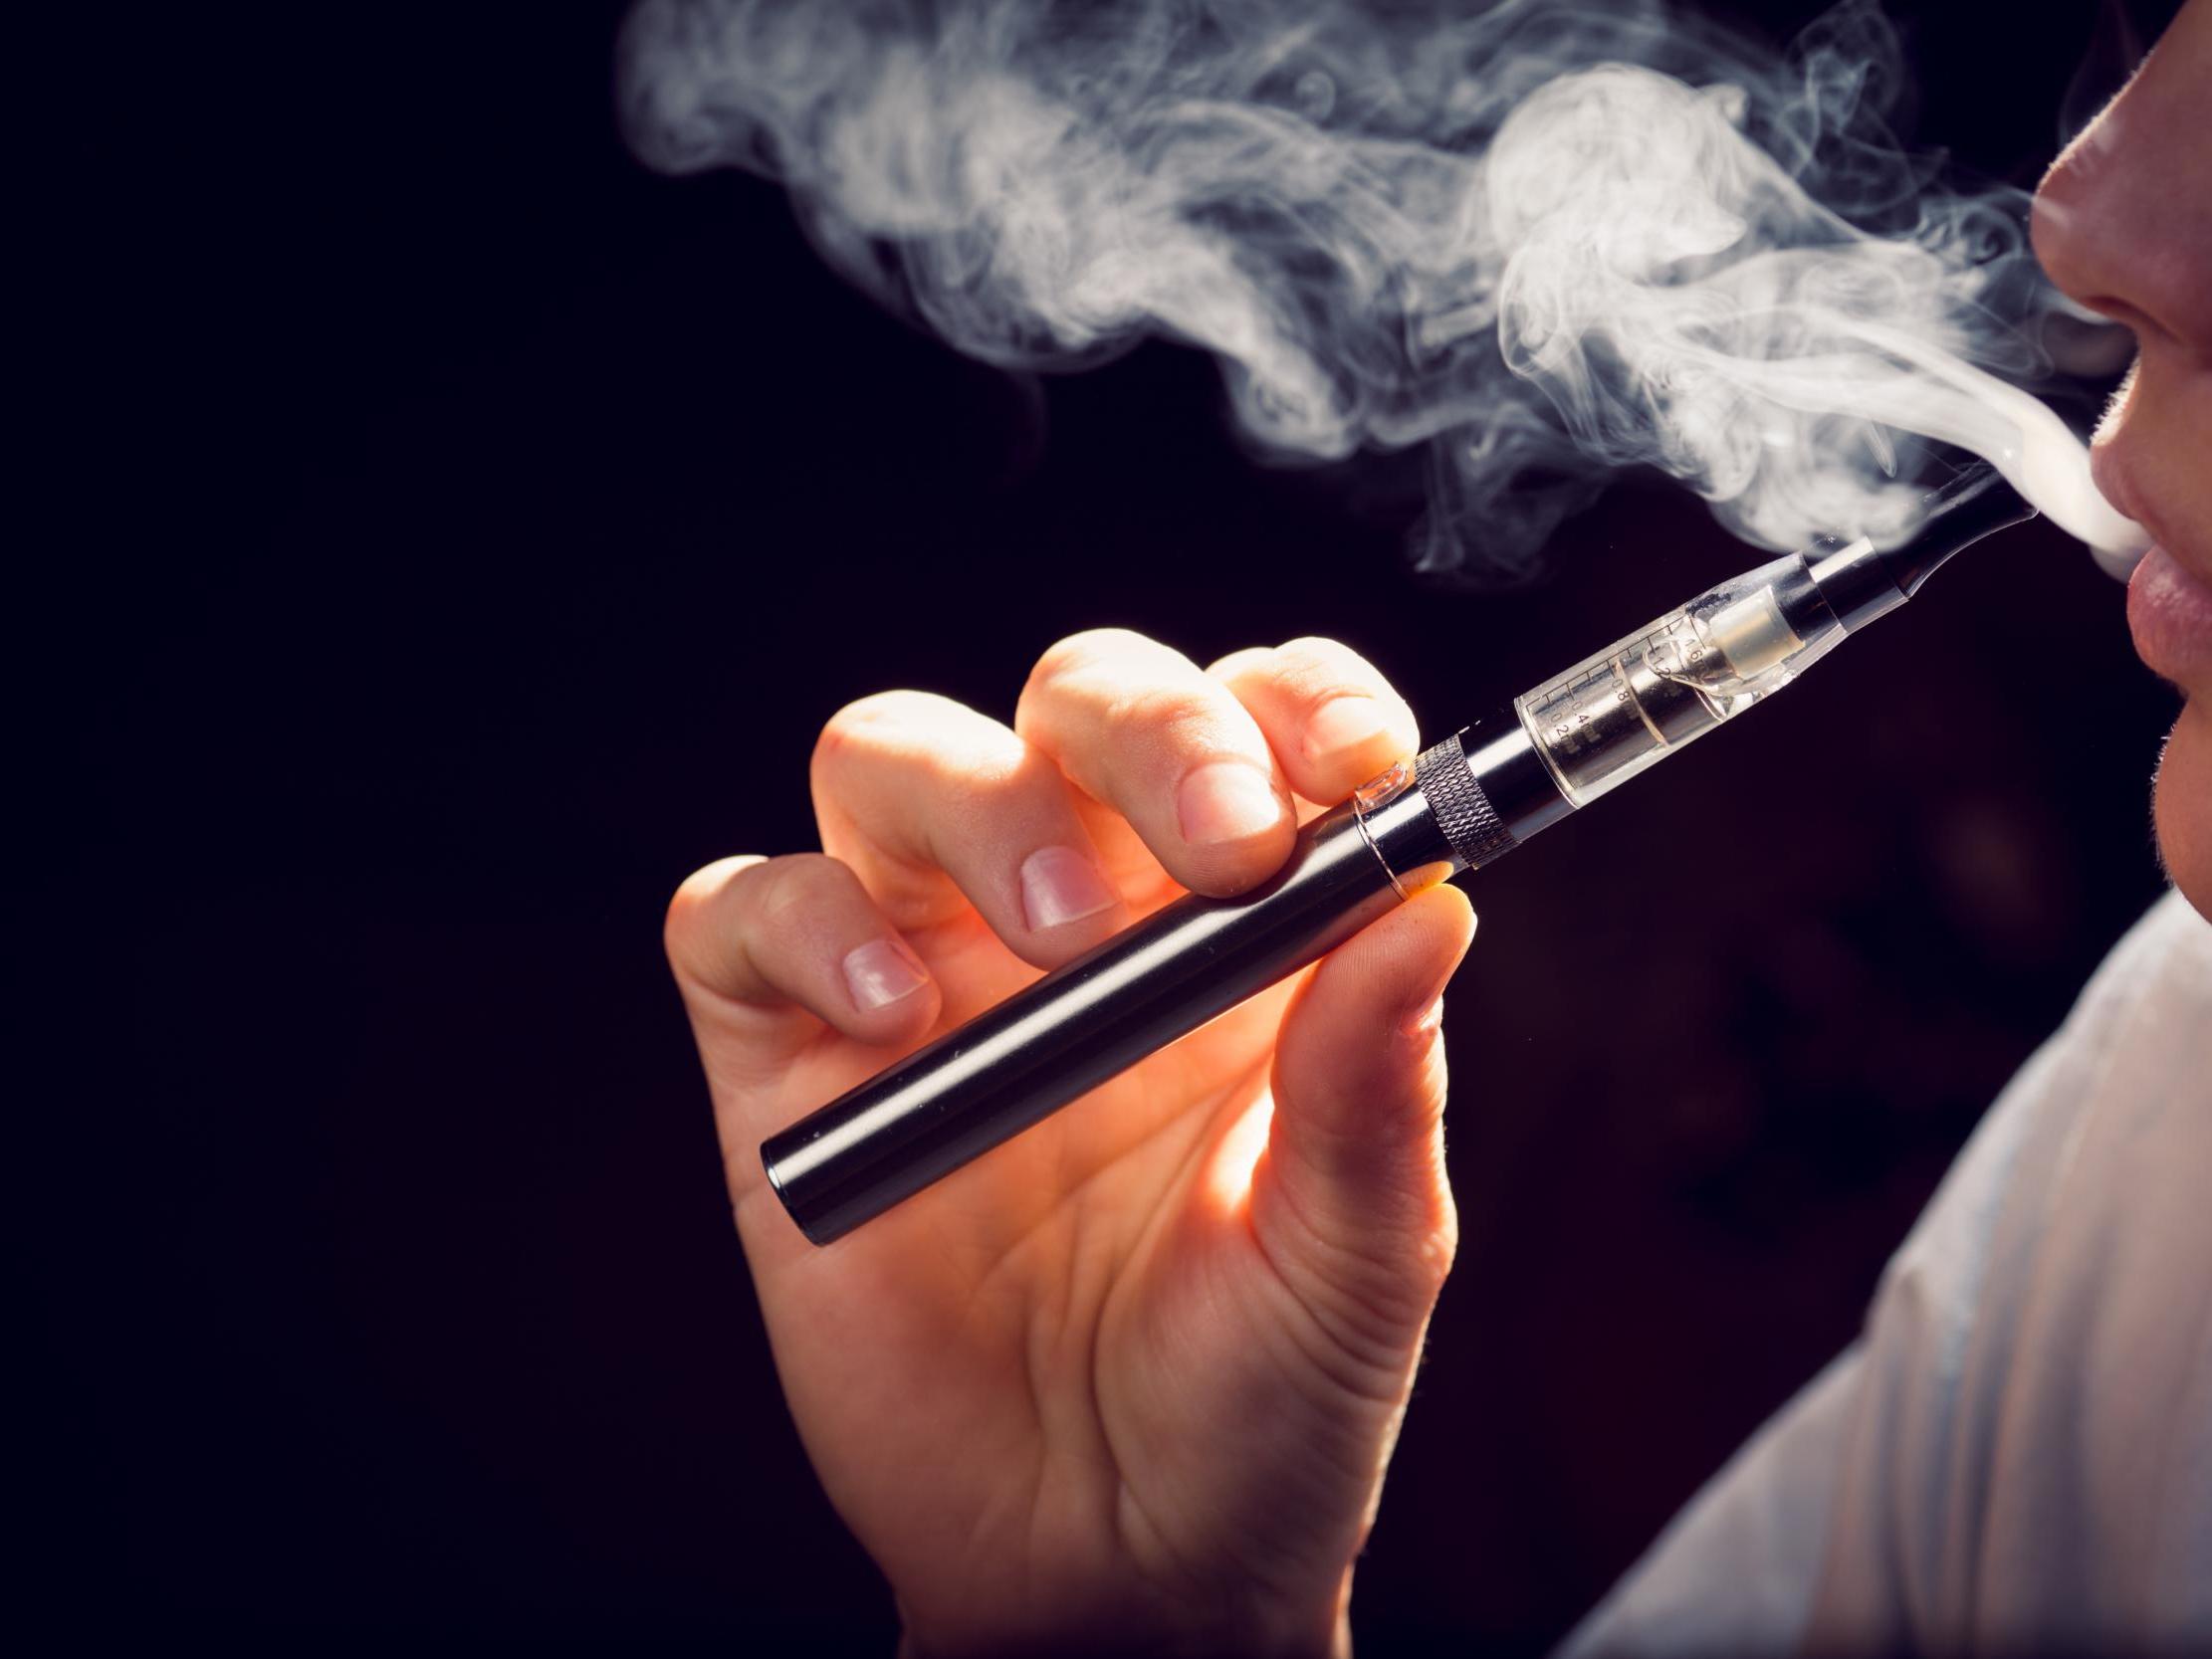 Scientists say vaping is not worth the risk until better evidence is available